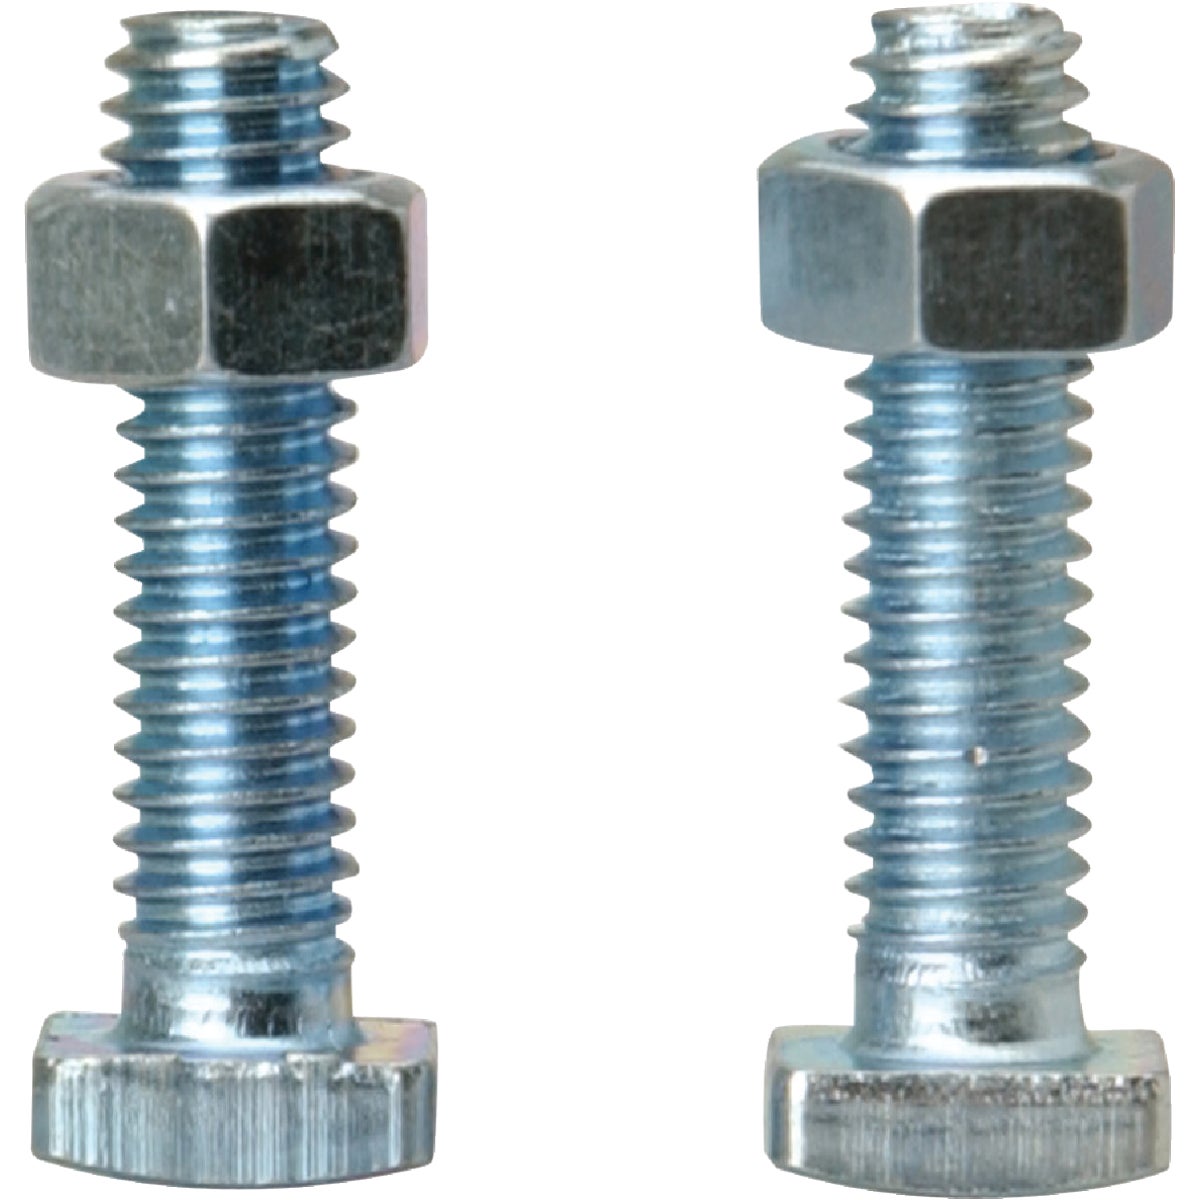 Item 572749, 2 special corrosion-resistant bolts 5/16" x 1-1/4" long with hex nuts.